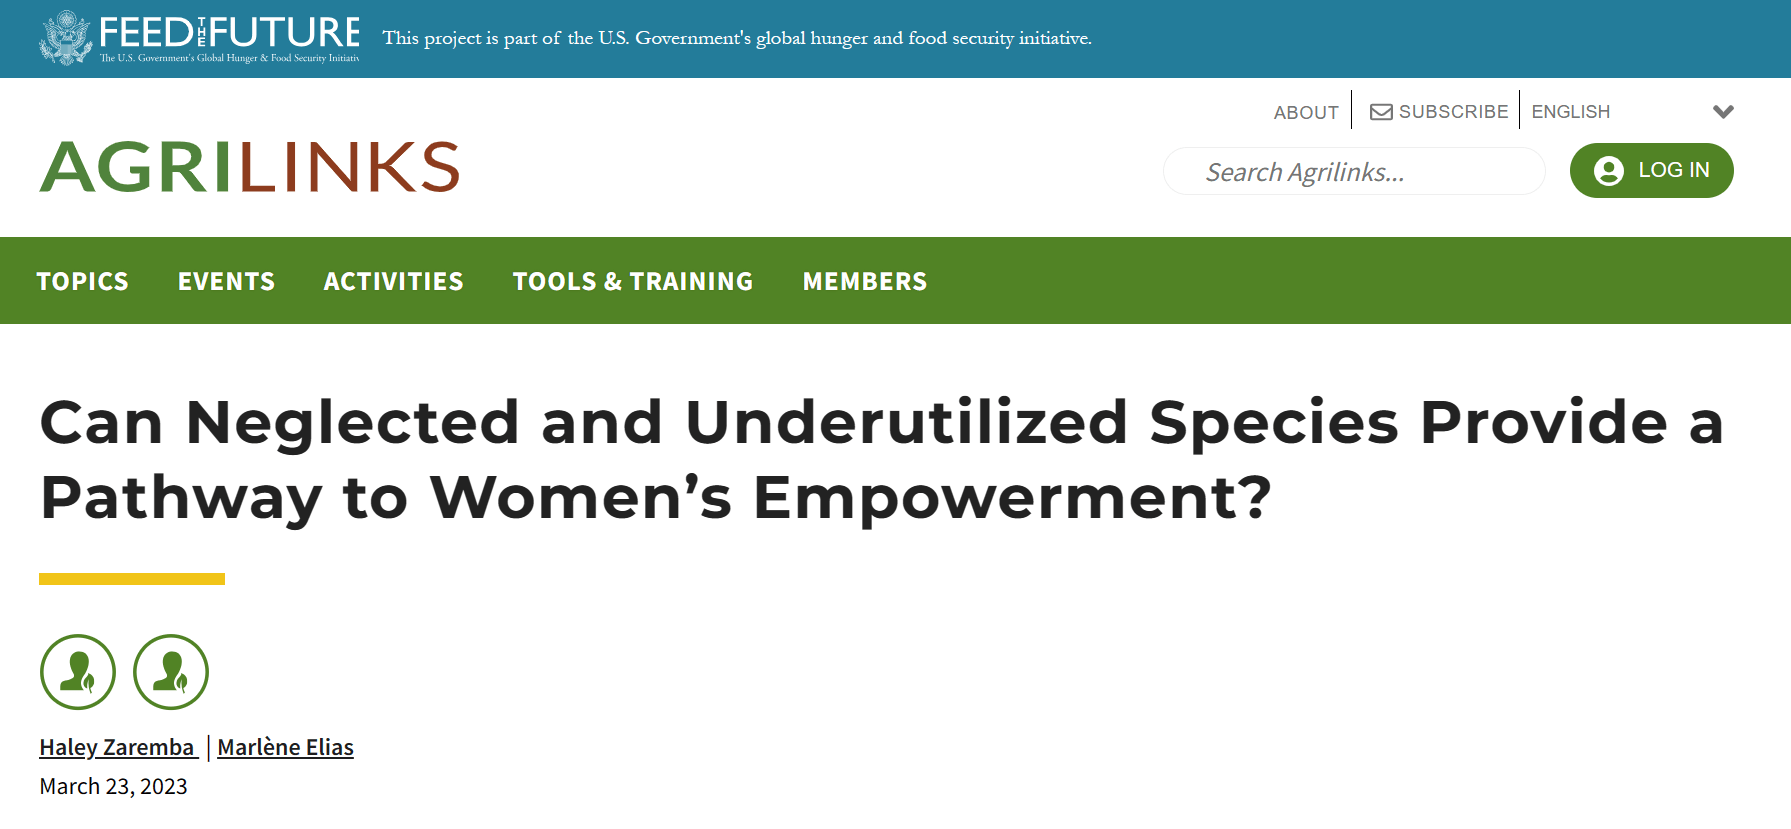 Can Neglected and Underutilized Species Provide a Pathway to Women’s Empowerment?